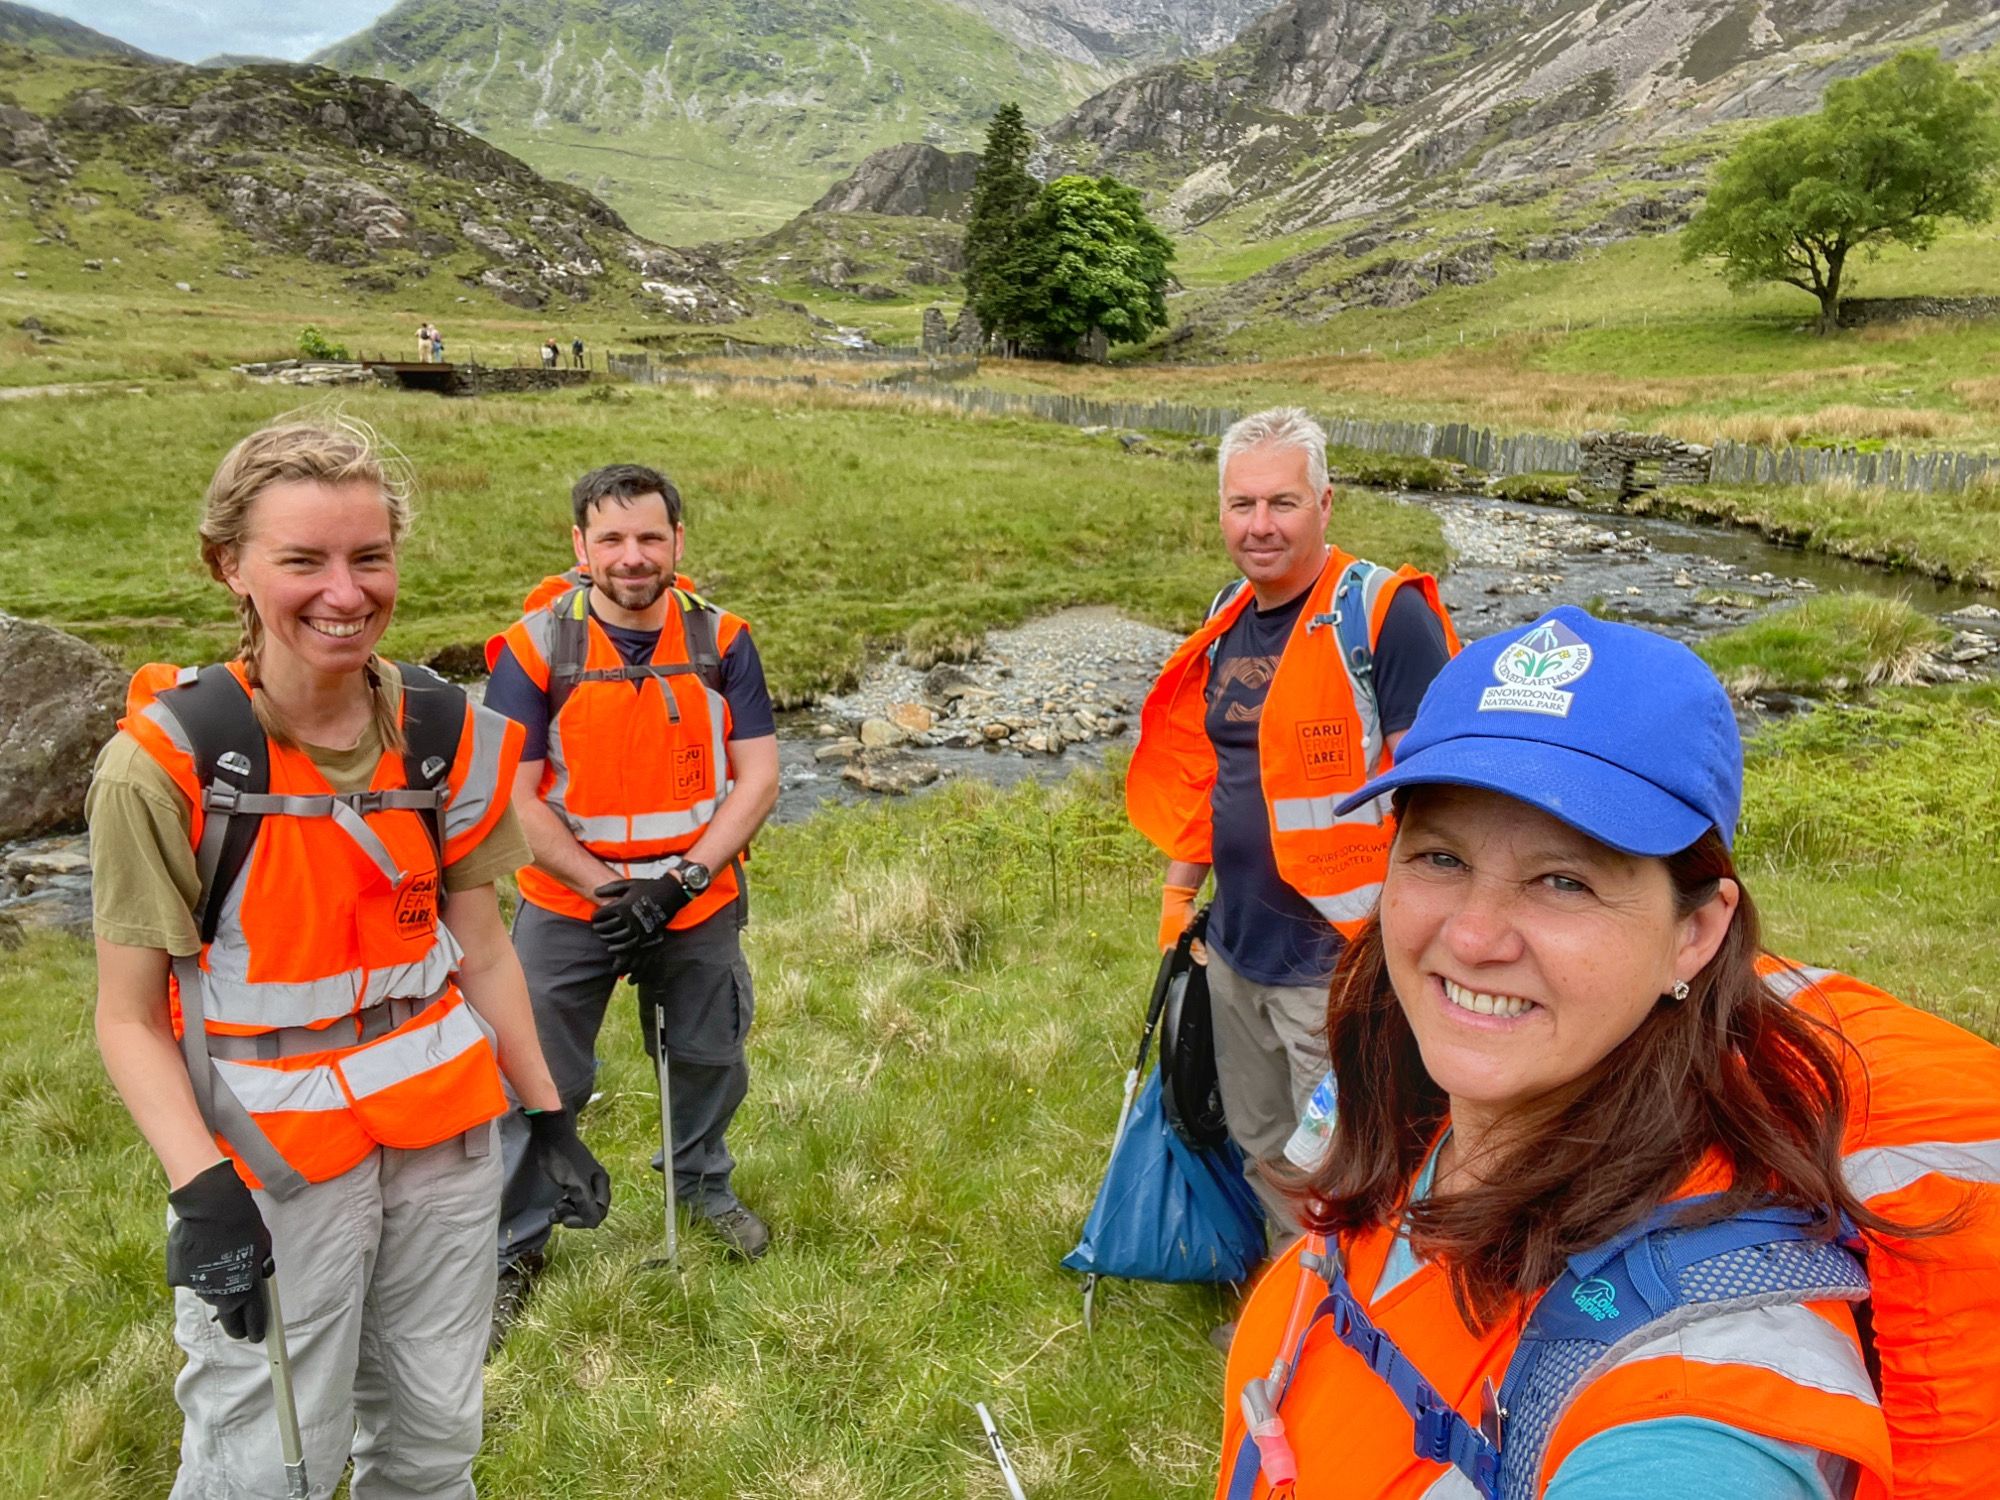 The Caru Eryri scheme is a volunteer plan to help manage the effect that an increasing number of visitors is having on the National Park.